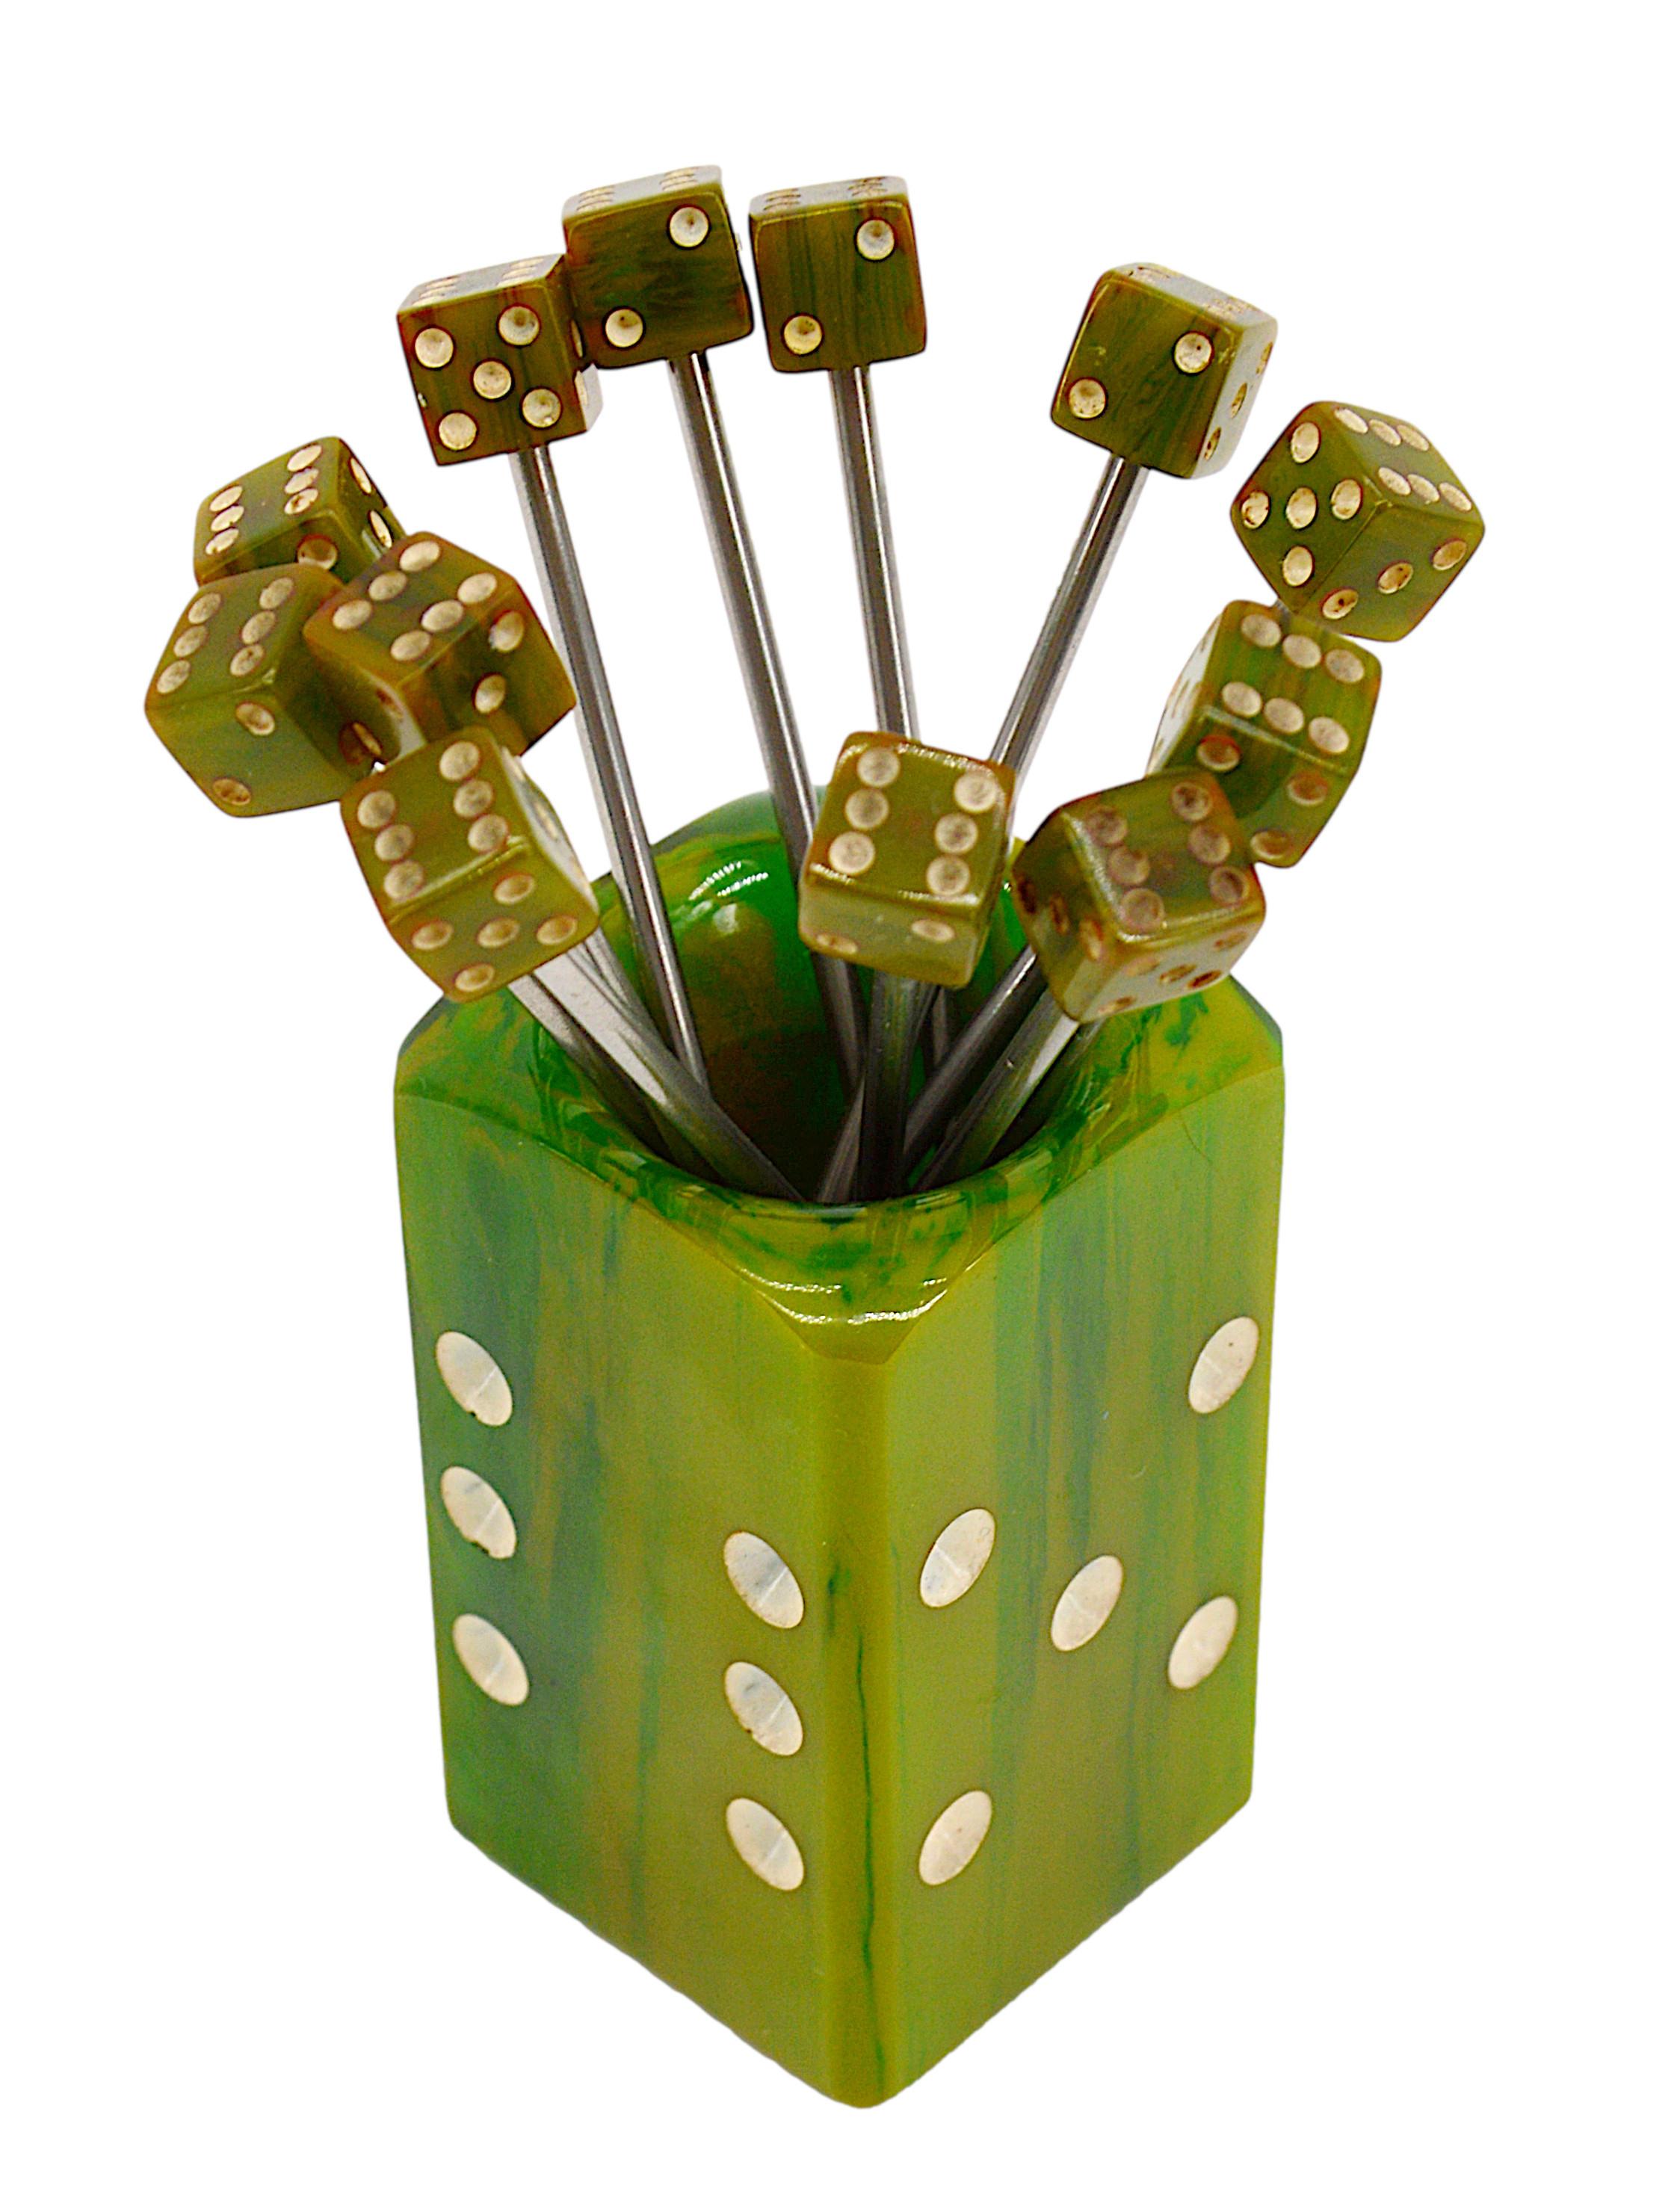 French mid-century dice cocktail picks, France, 1950s. Bakelite & metal. 12 cocktail picks. Height with picks included: 10.5cm - 4.13